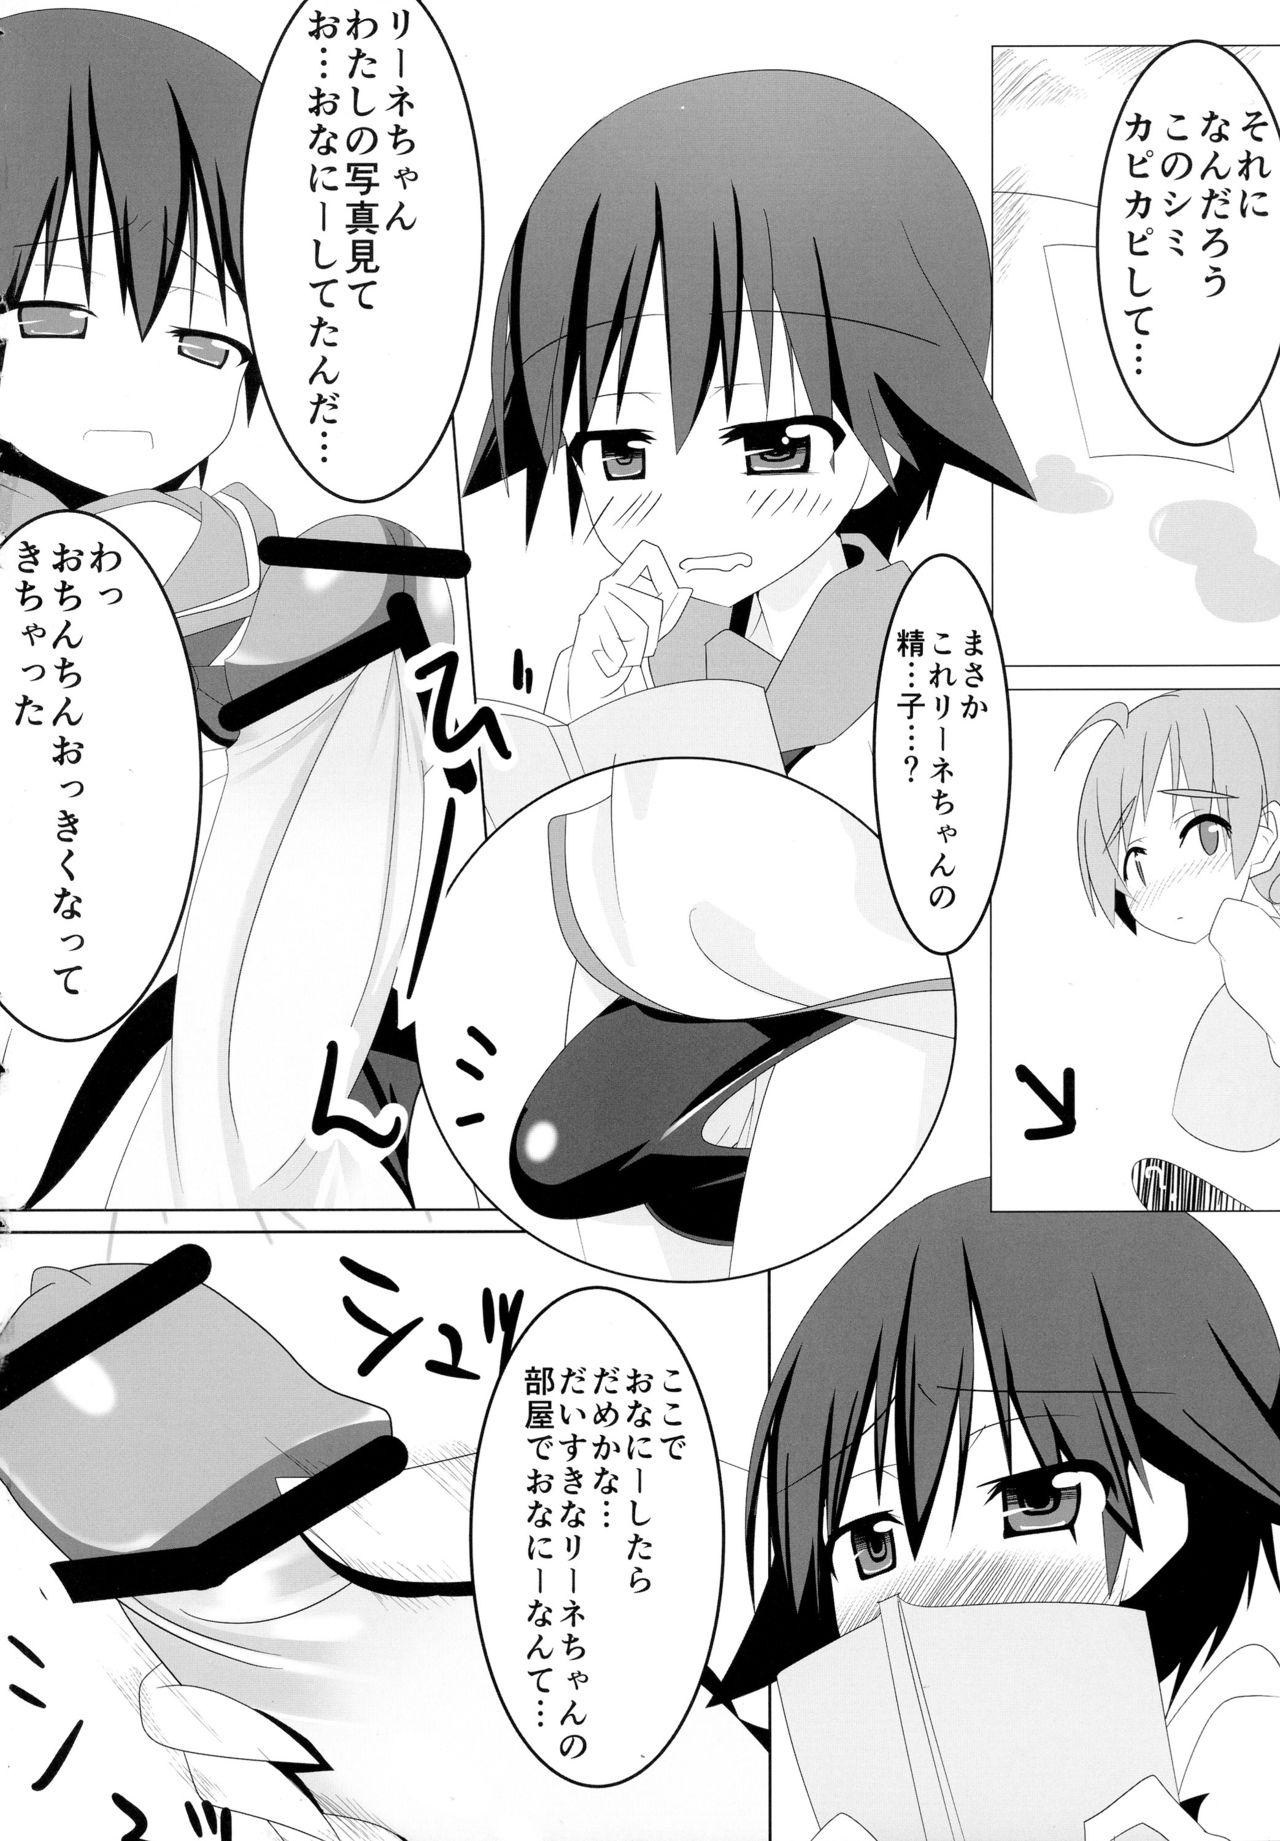 Submissive Witchincraft - Strike witches Awesome - Page 4